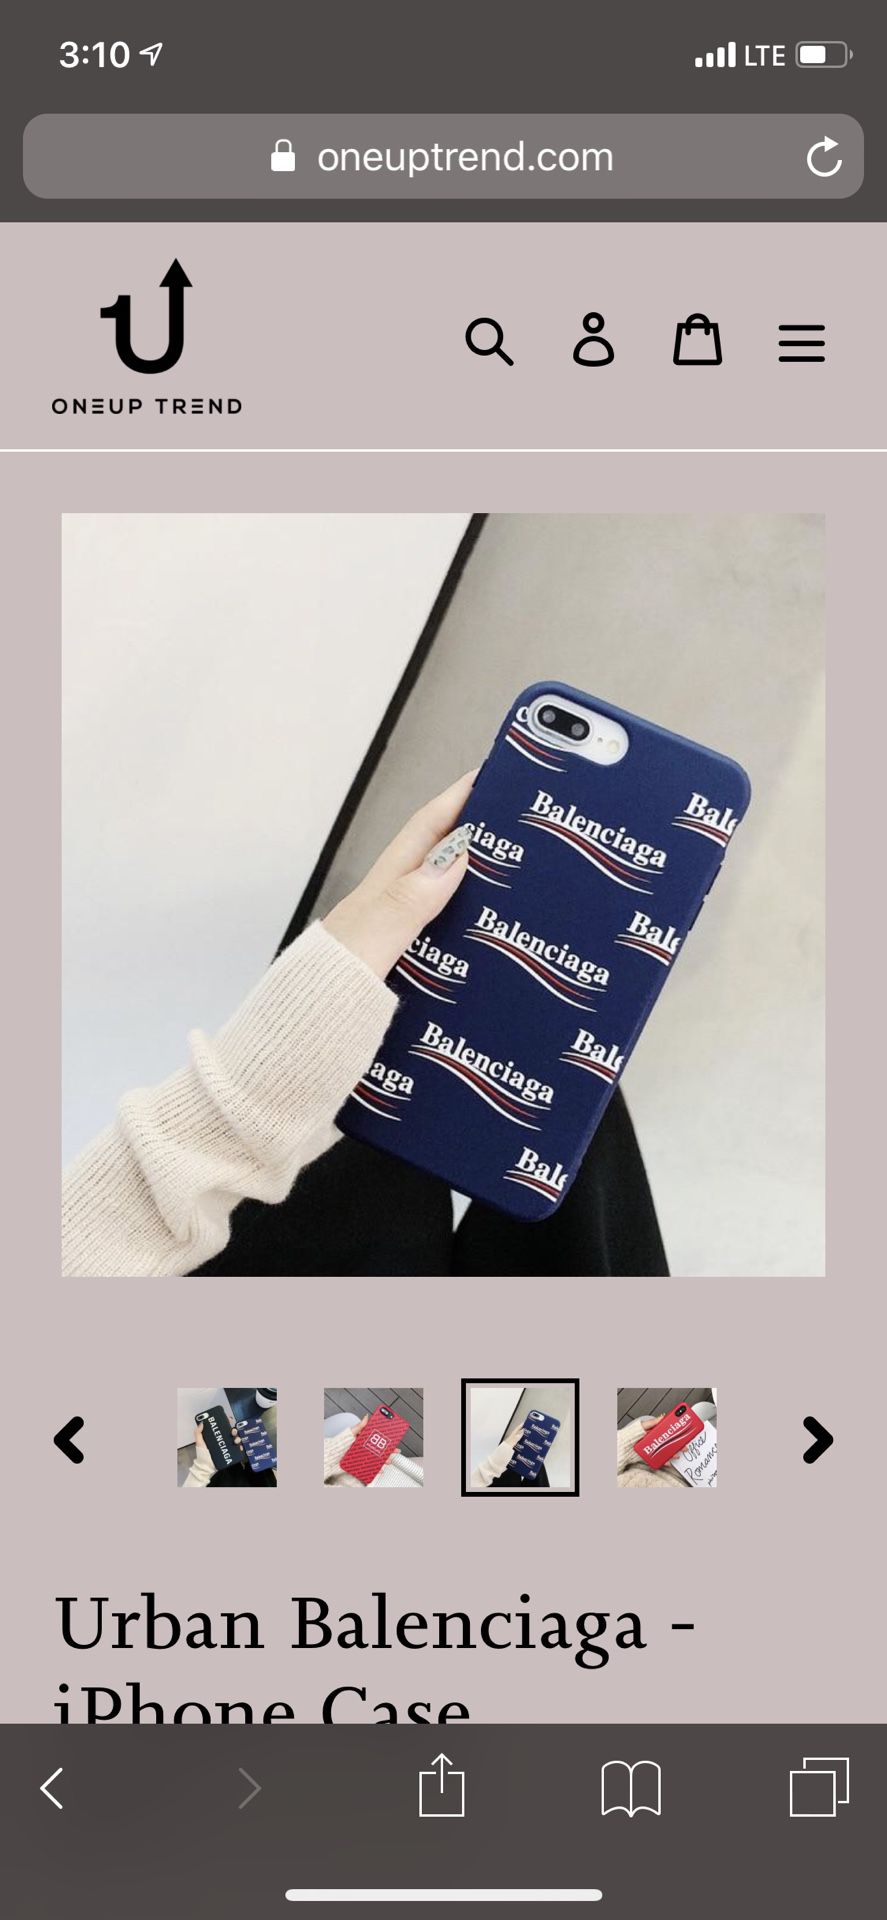 enorm patologisk radikal Balenciaga Sport iPhone Case for Sale in Henderson, NV - OfferUp